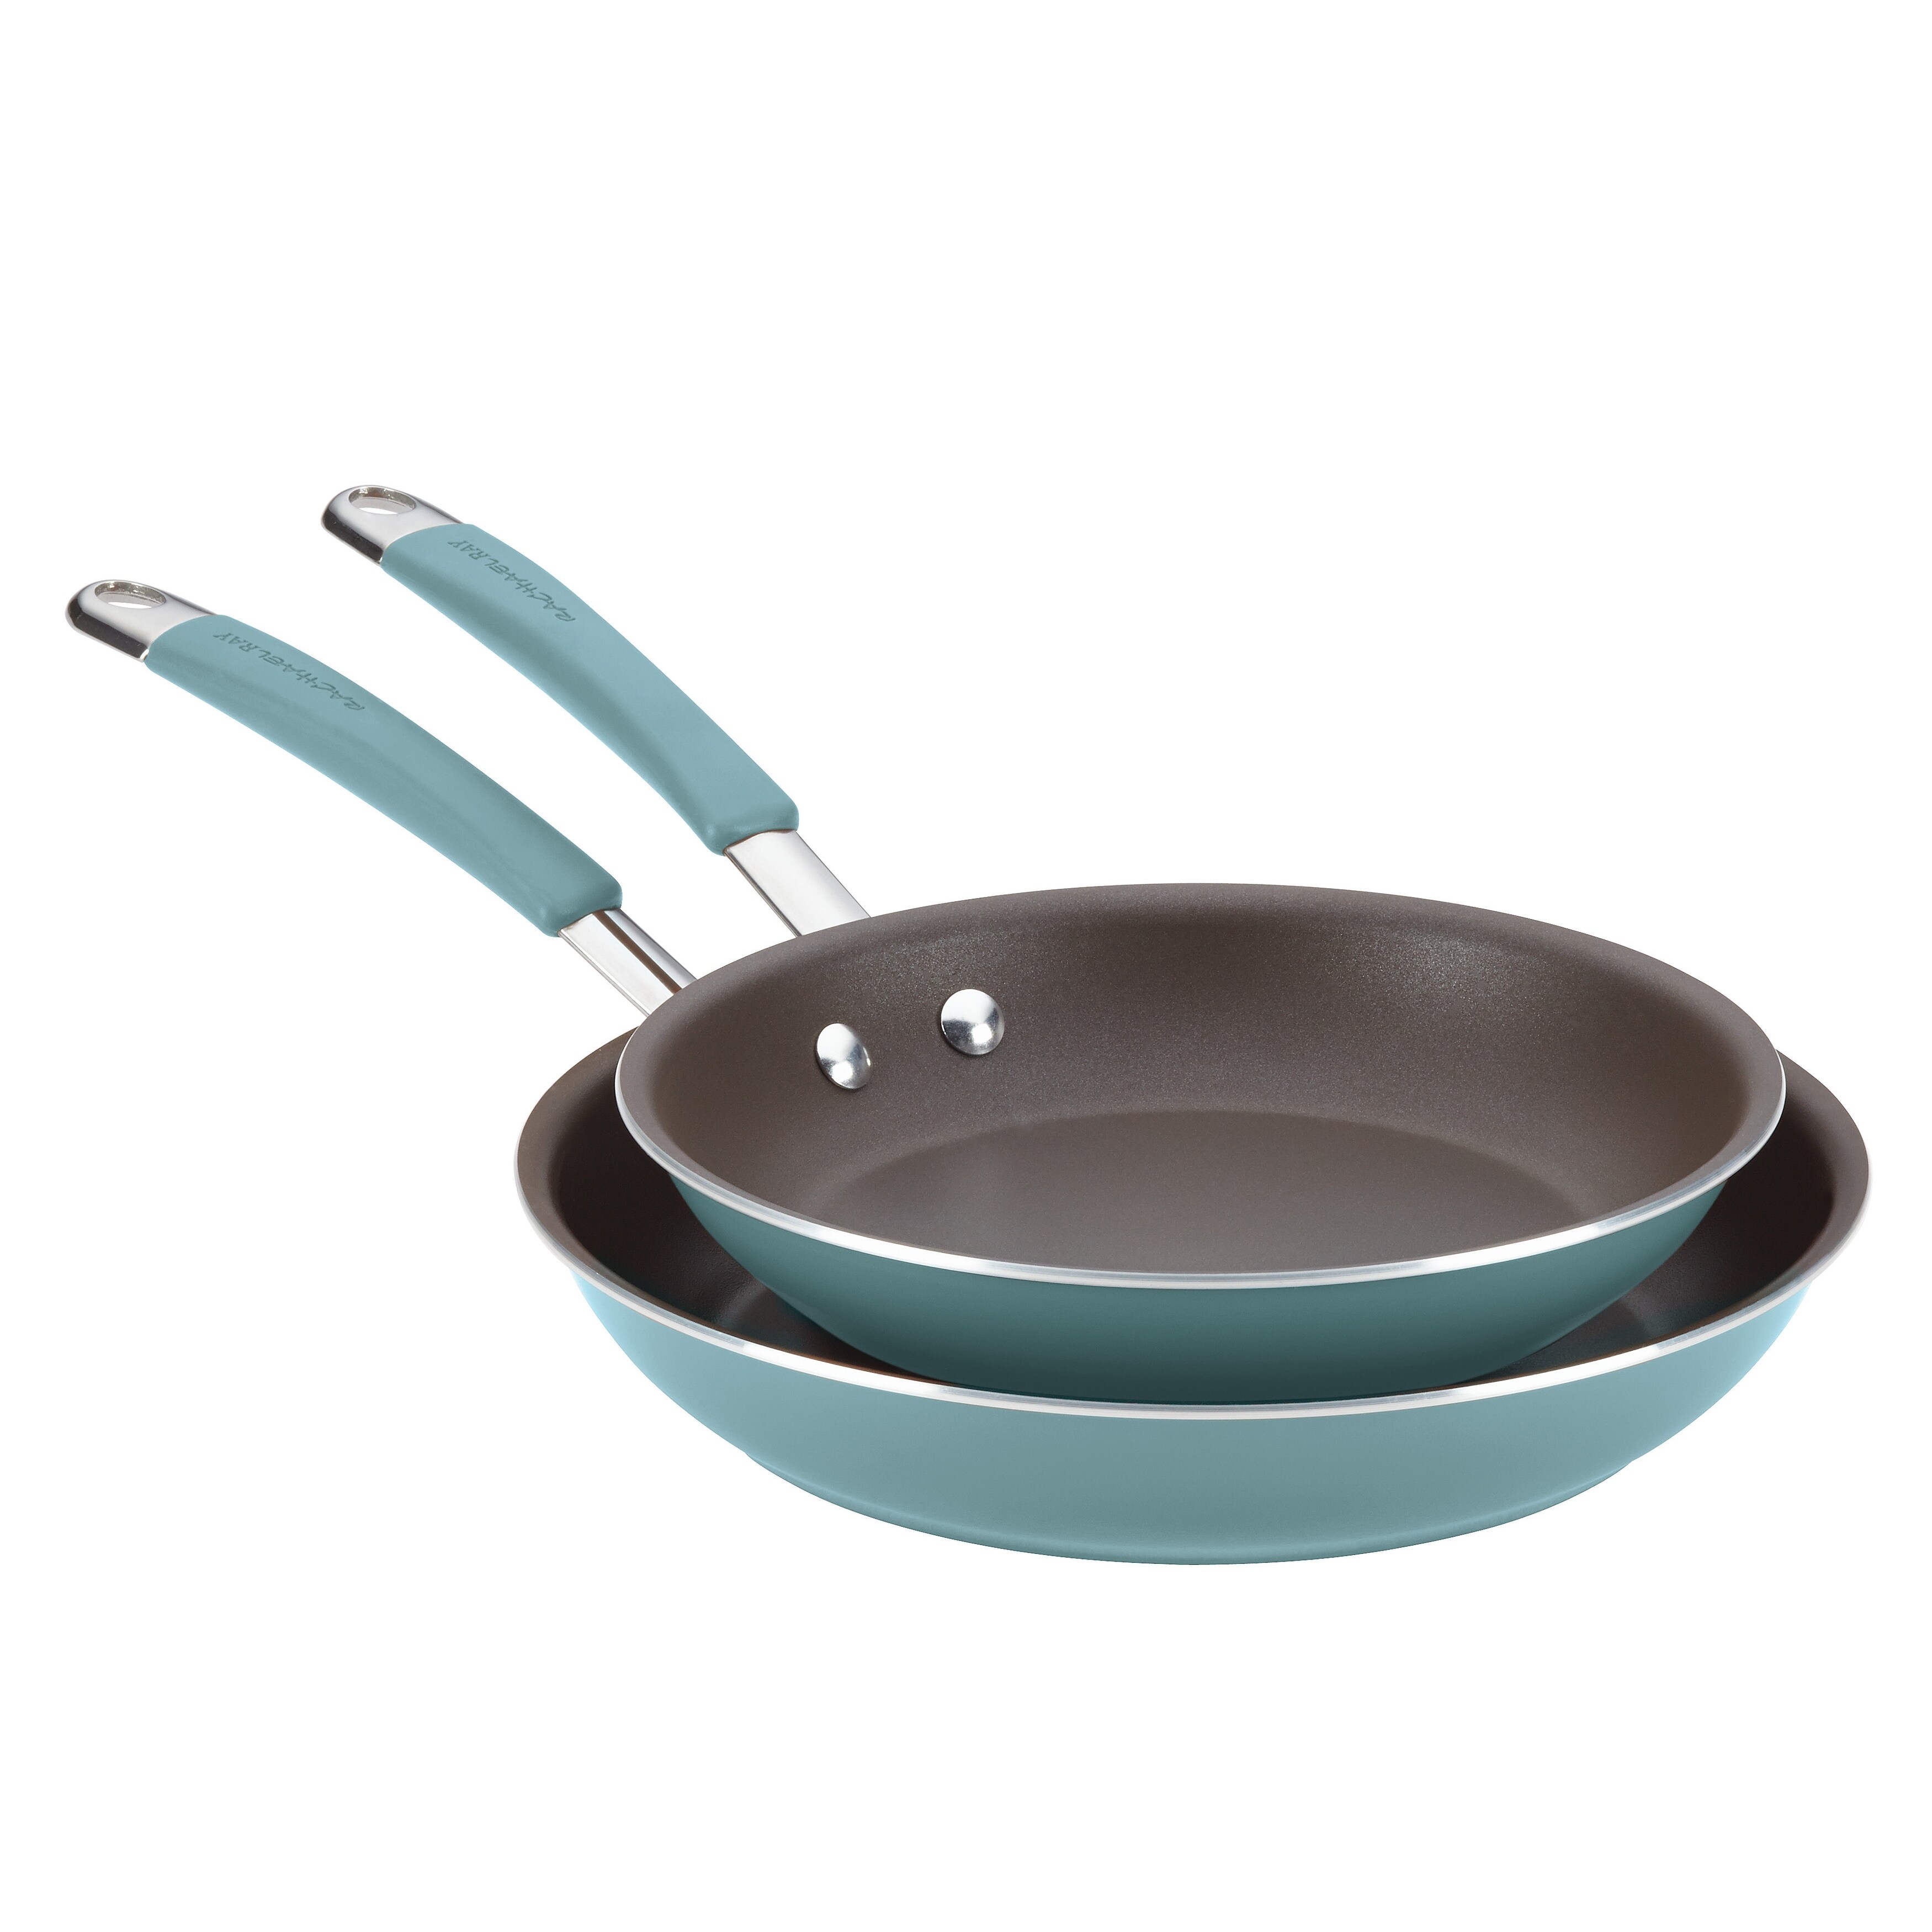 https://ak1.ostkcdn.com/images/products/is/images/direct/aac2f24d3846327c401e31f4f653129fe23fd0d7/Rachael-Ray-Cucina-Hard-Porcelain-Enamel-Frying-Pan-Set%2C-9.25-Inch-and-11_inch%2C-Cranberry-Red.jpg